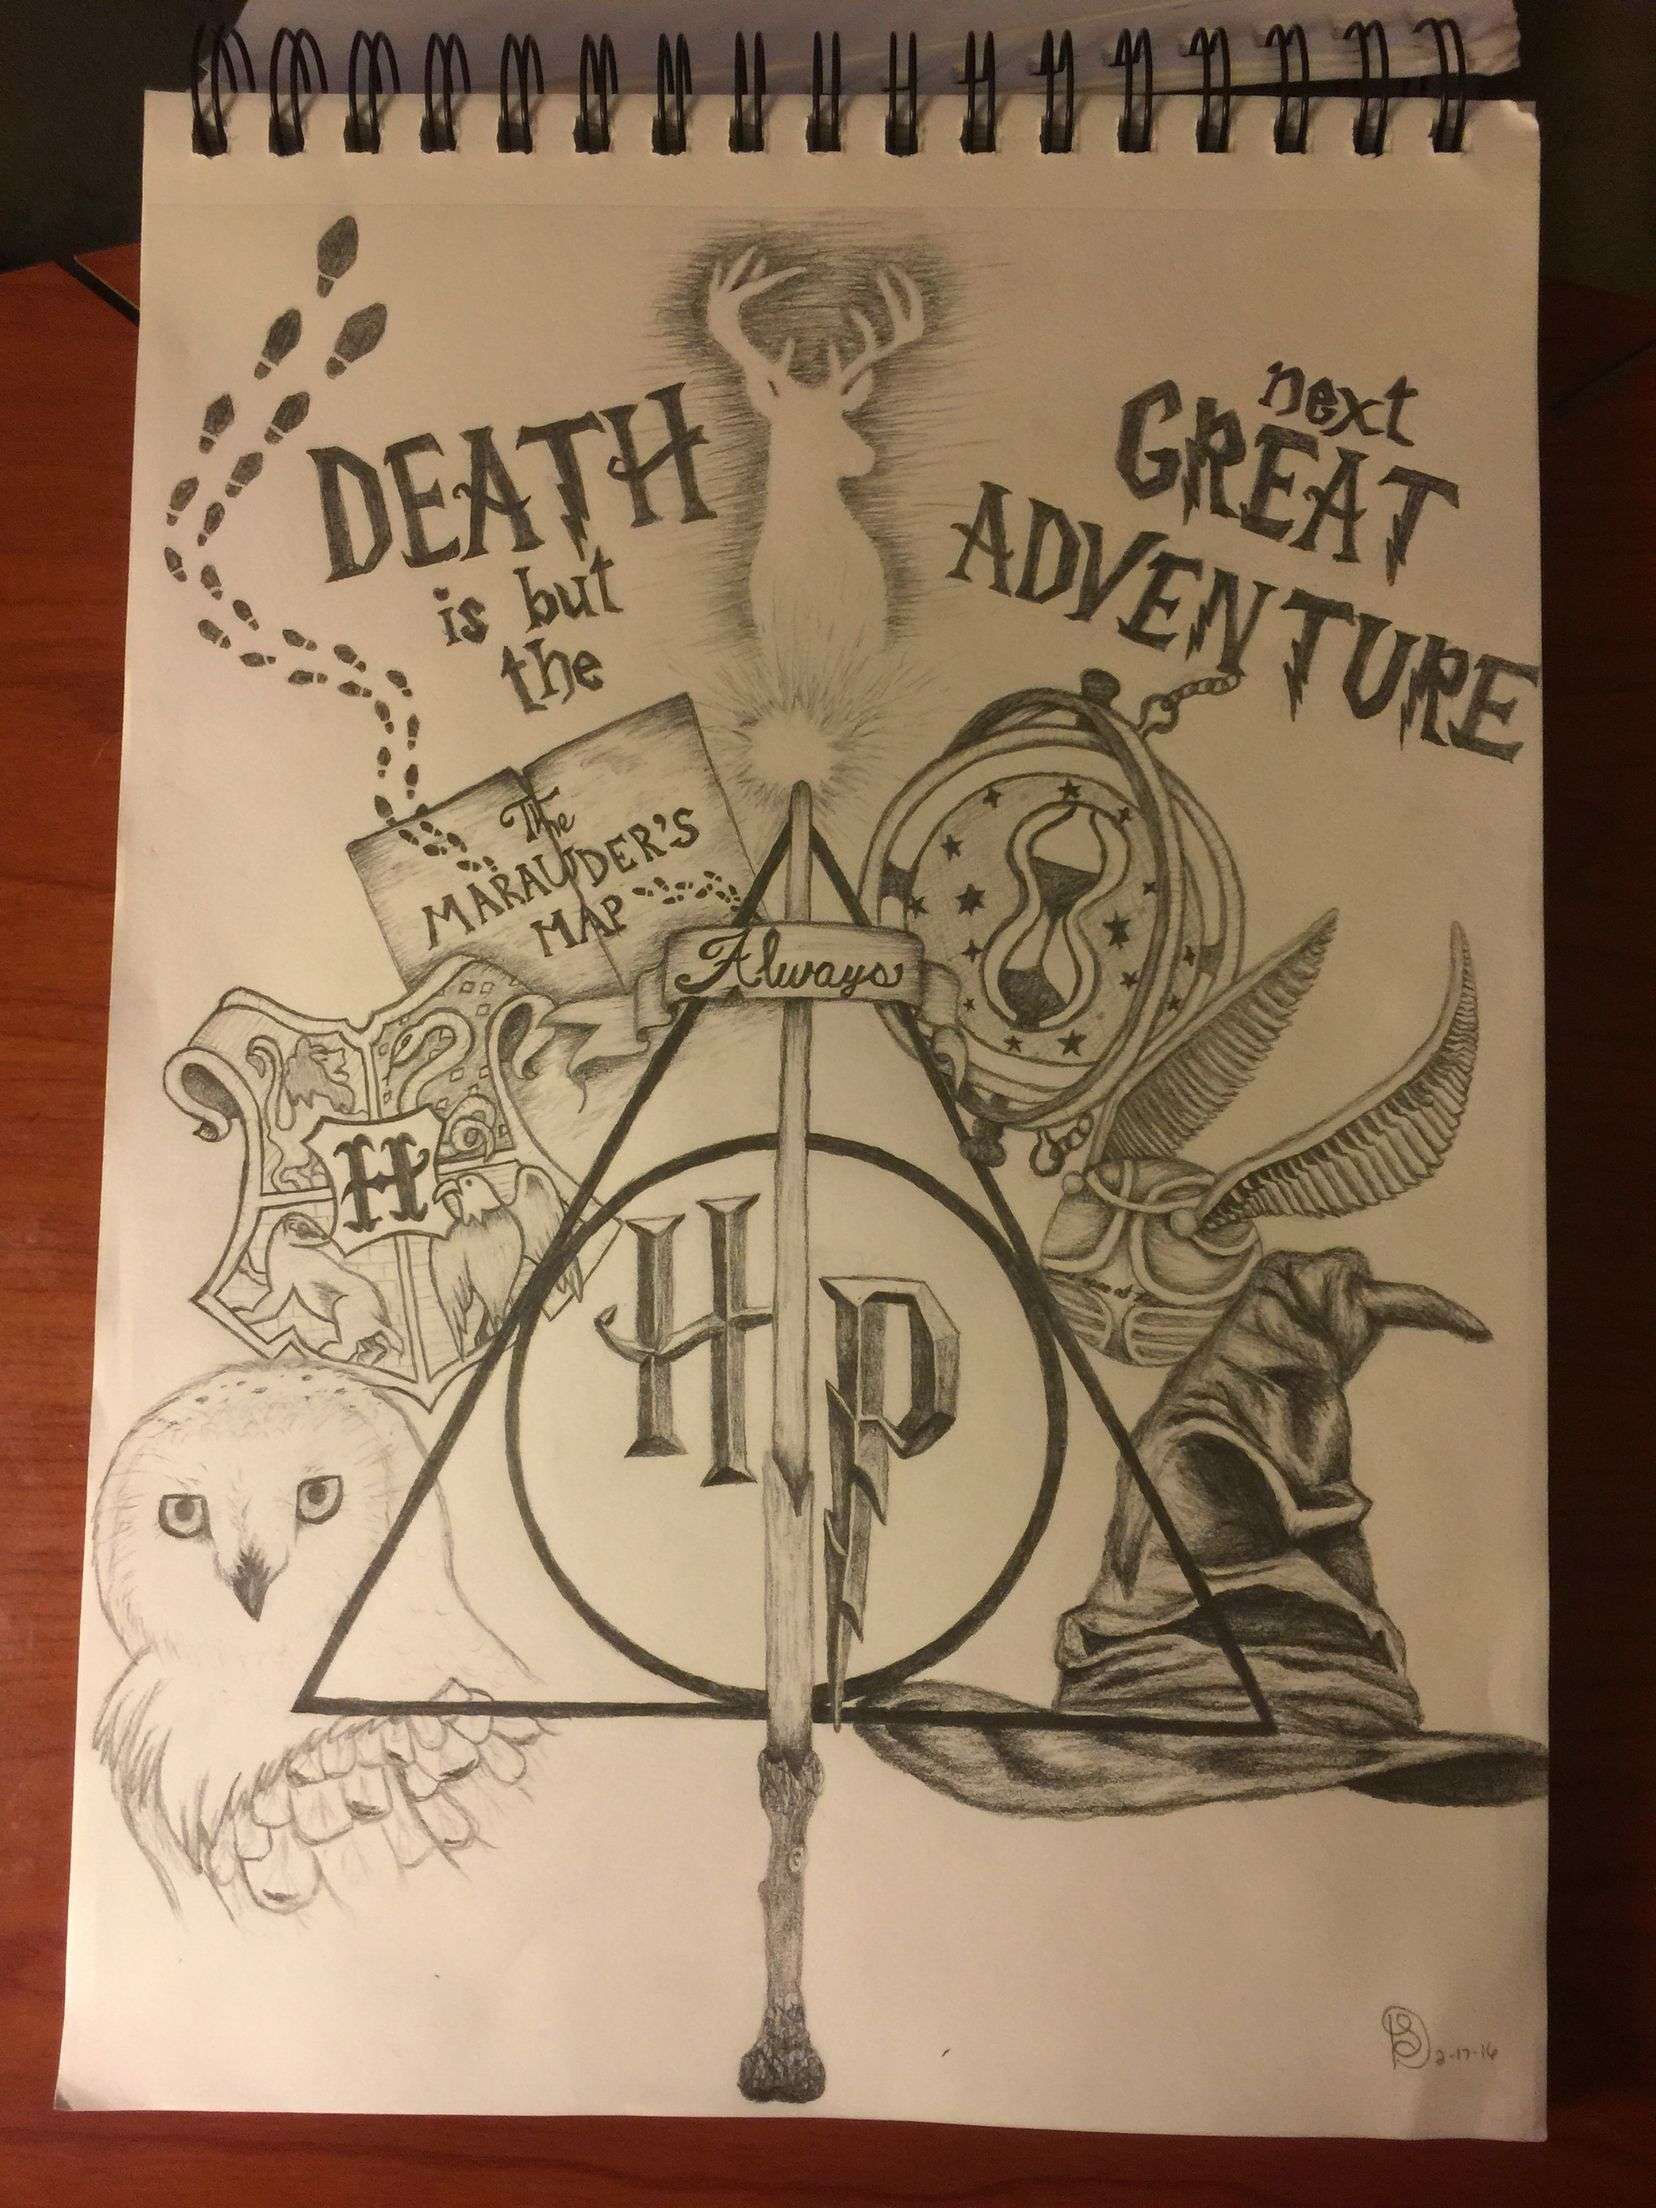 Harry Potter collage drawing